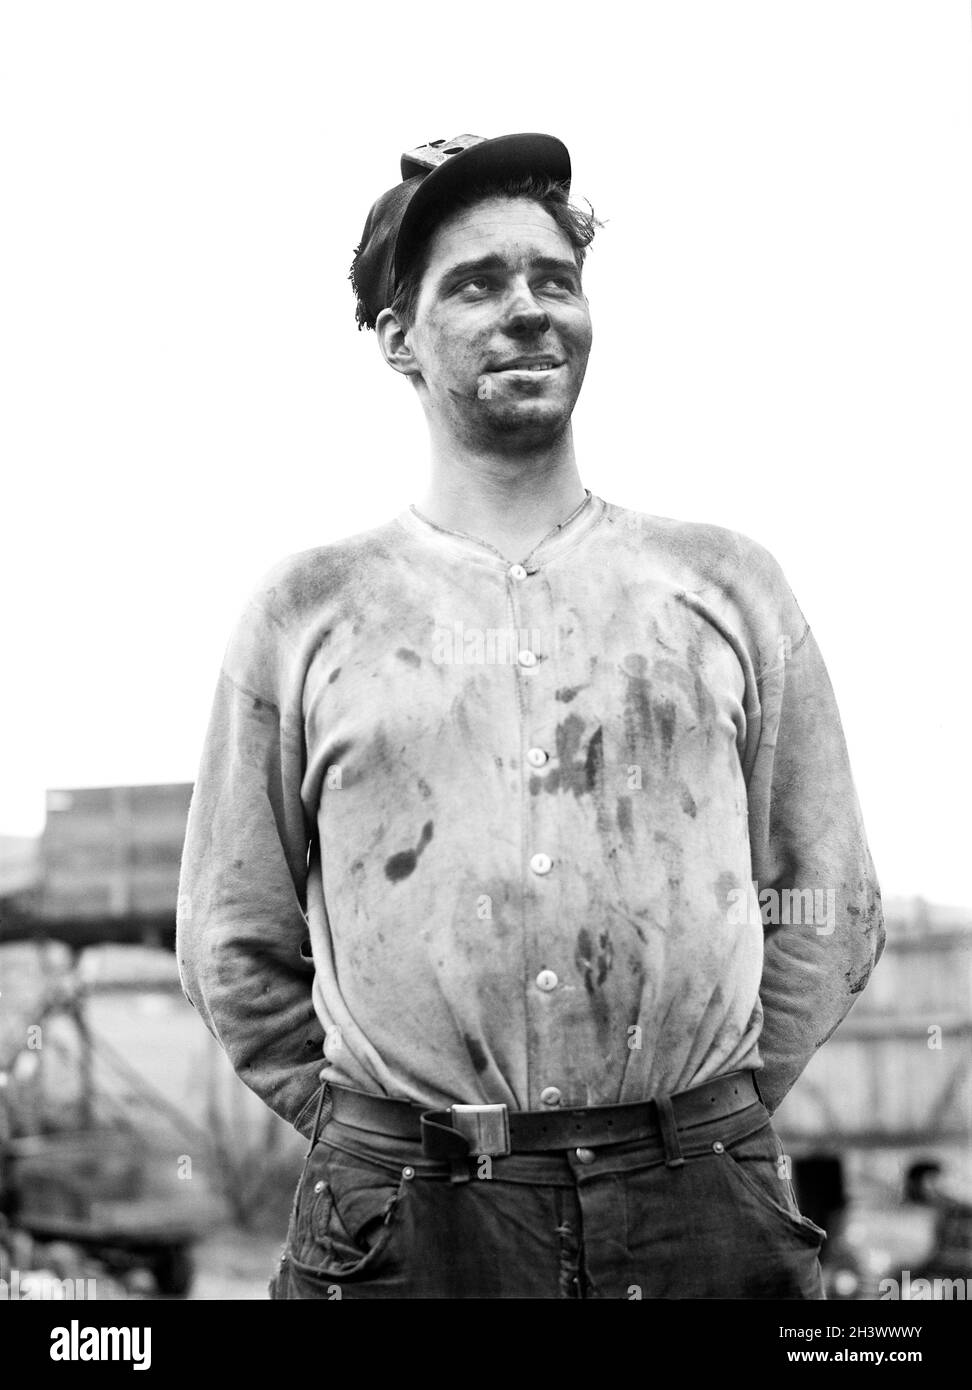 Young Miner who is also a Farm Laborer, near Falls Creek, Pennsylvania, USA, Jack Delano, U.S. Farm Security Administration, U.S. Office of War Information Photograph Collection, August 1940 Stock Photo